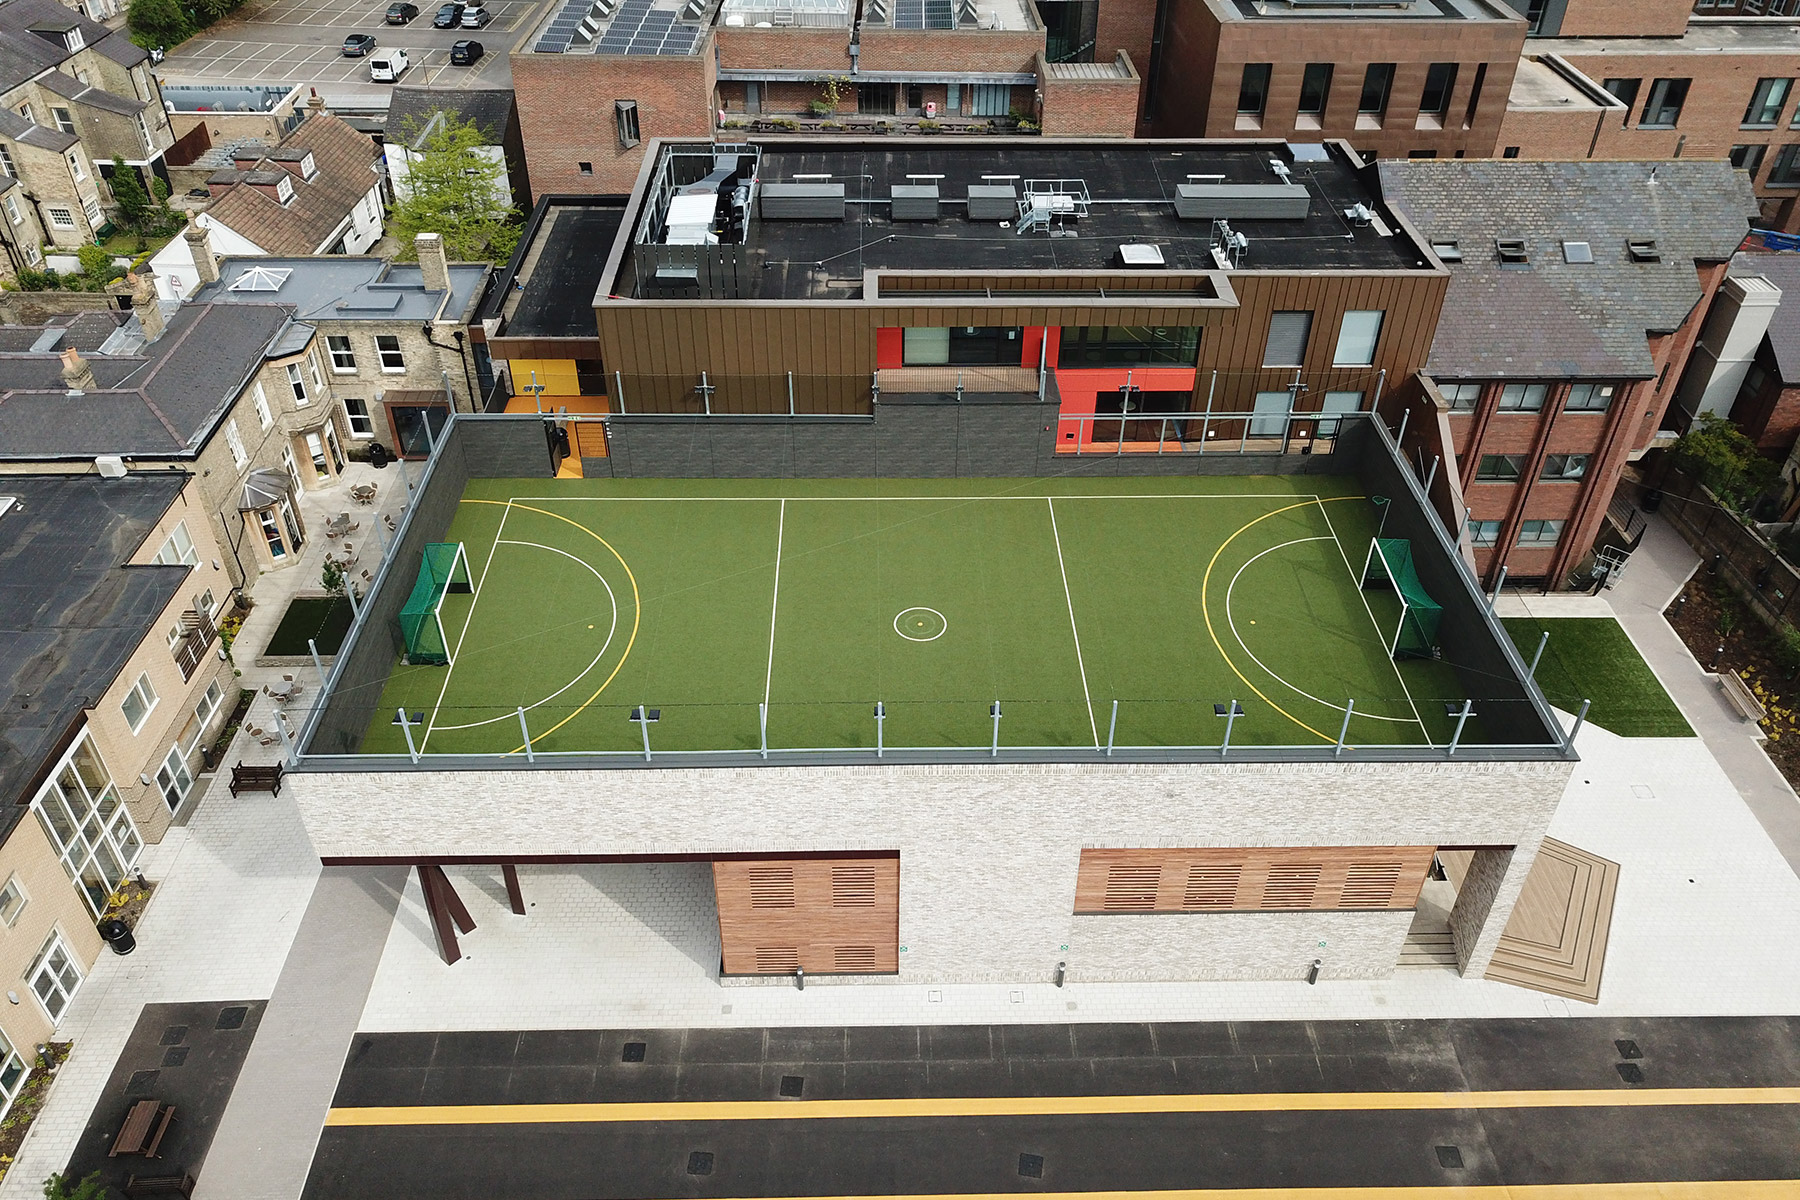 Second aerial view of MUGA court for sports learning school, by cambridge architects CDC studio